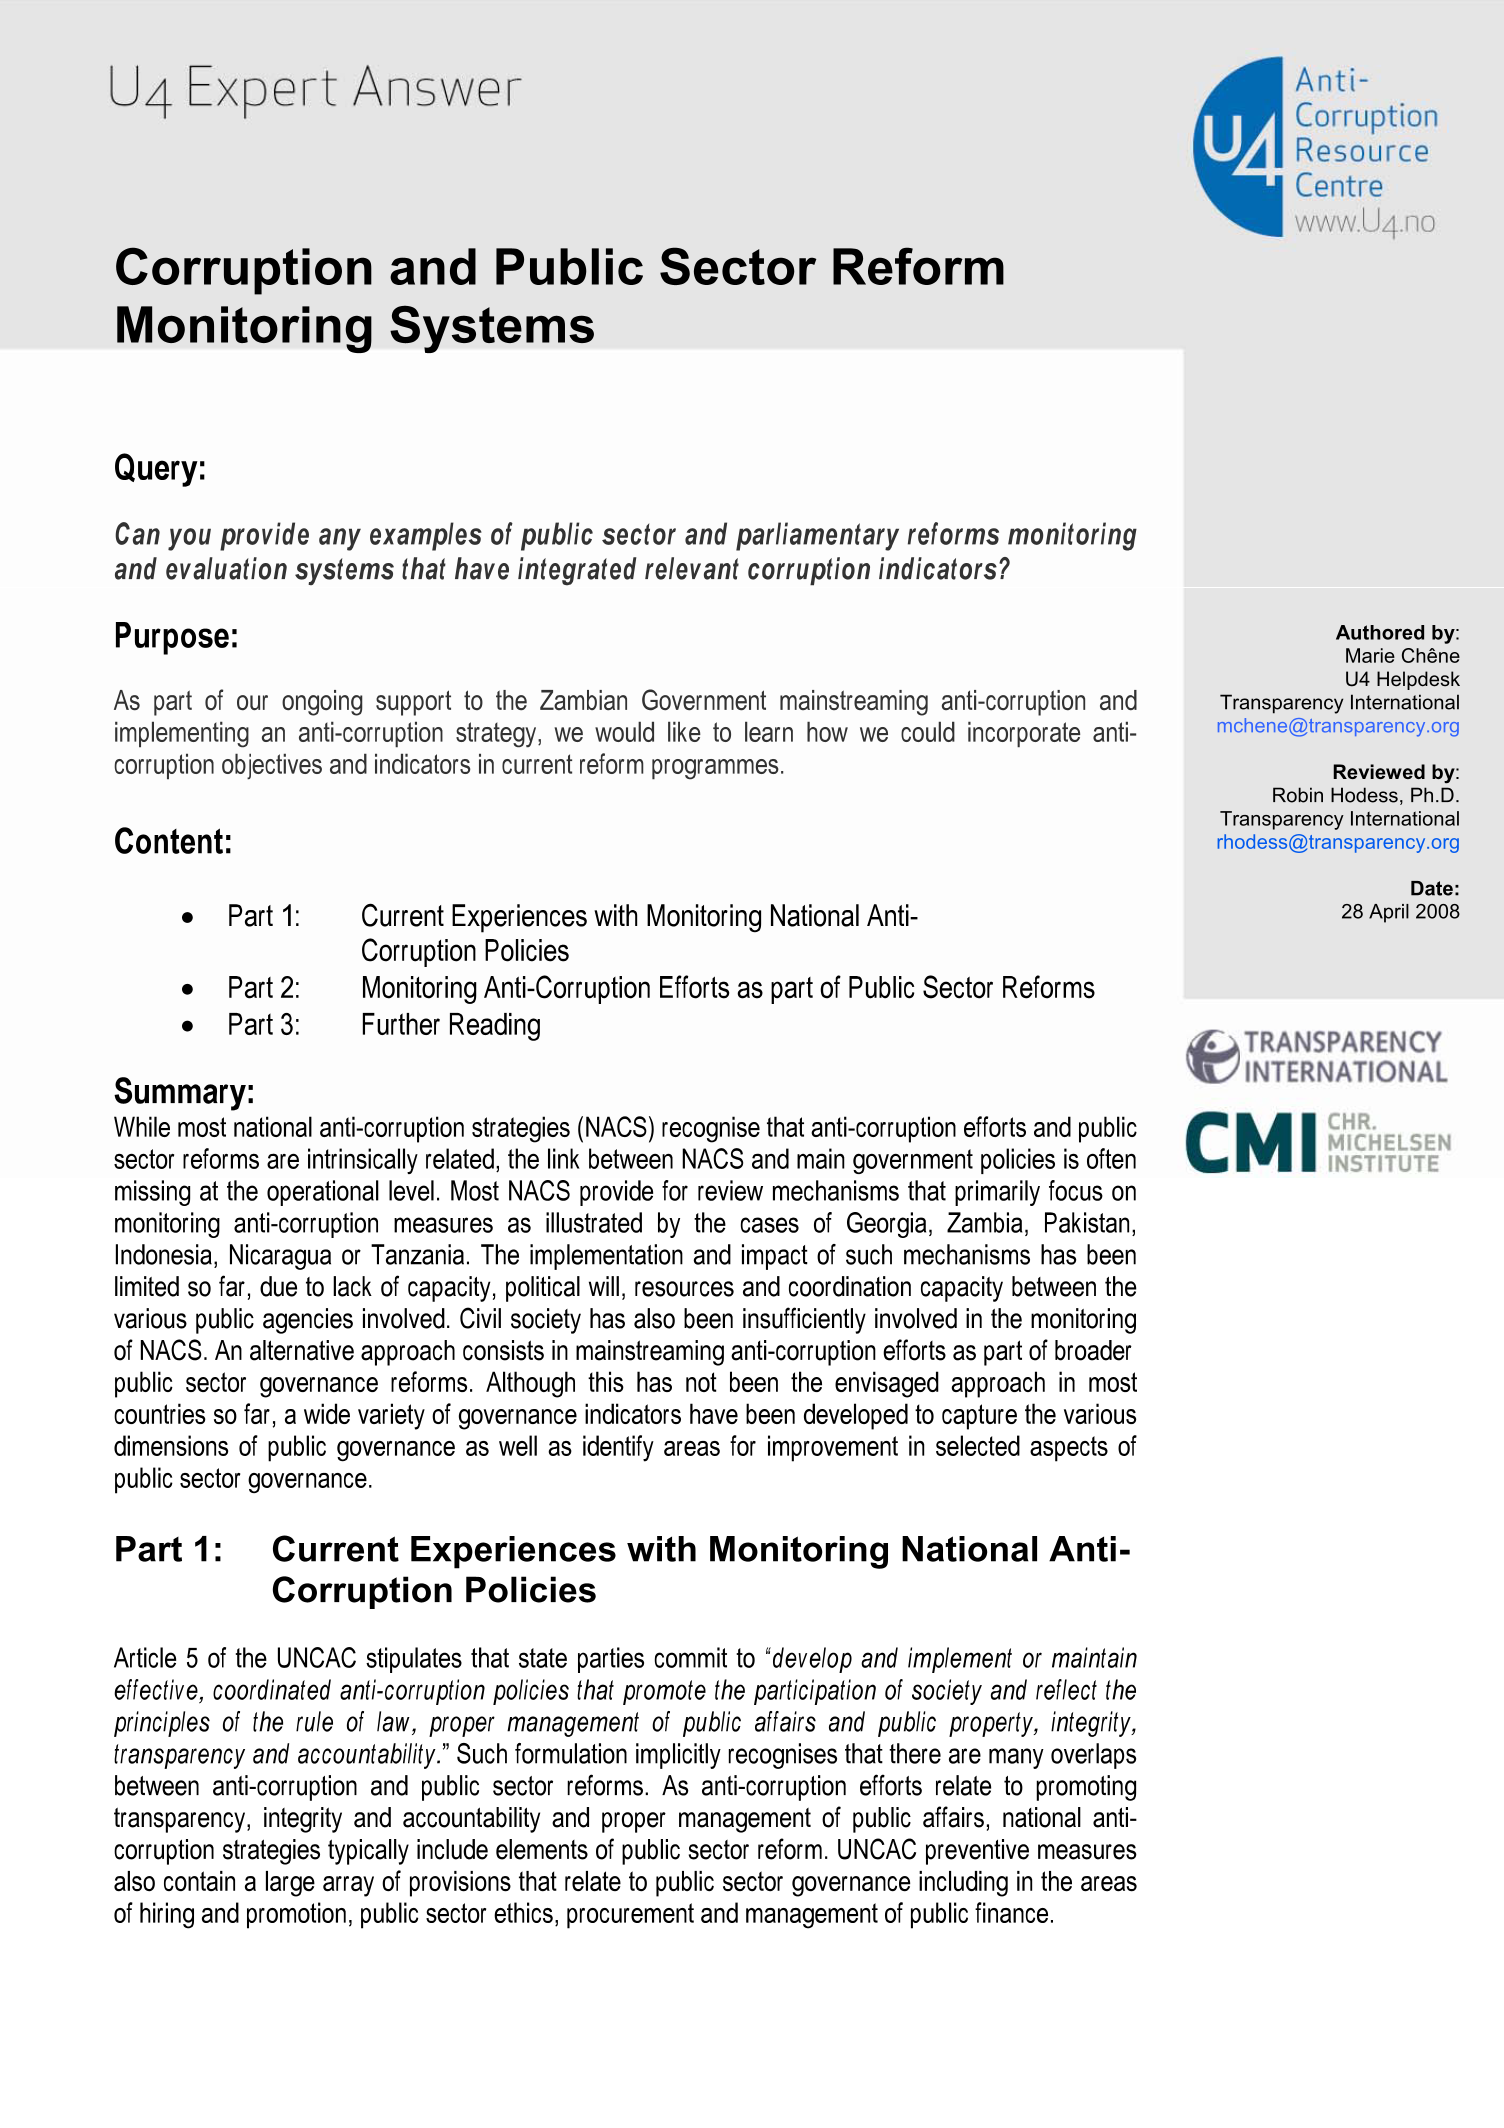 Corruption and public sector reform monitoring systems